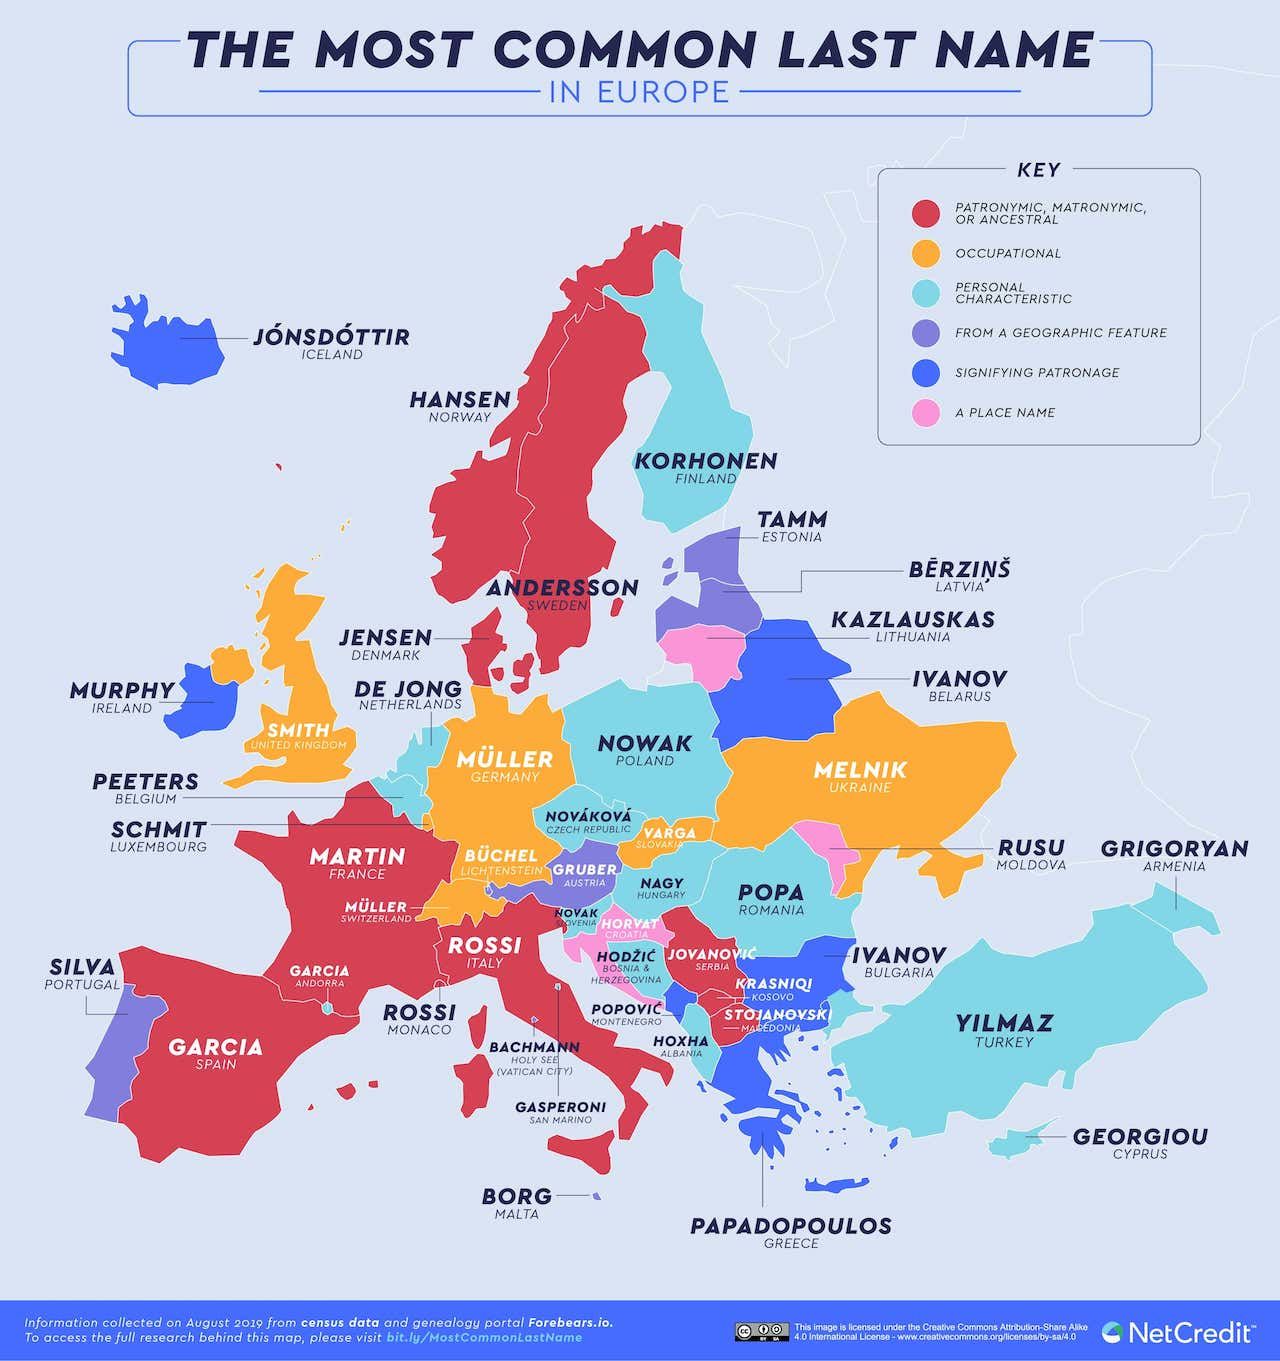 04_The-most-common-last-name-in-every-country_Europe.jpg